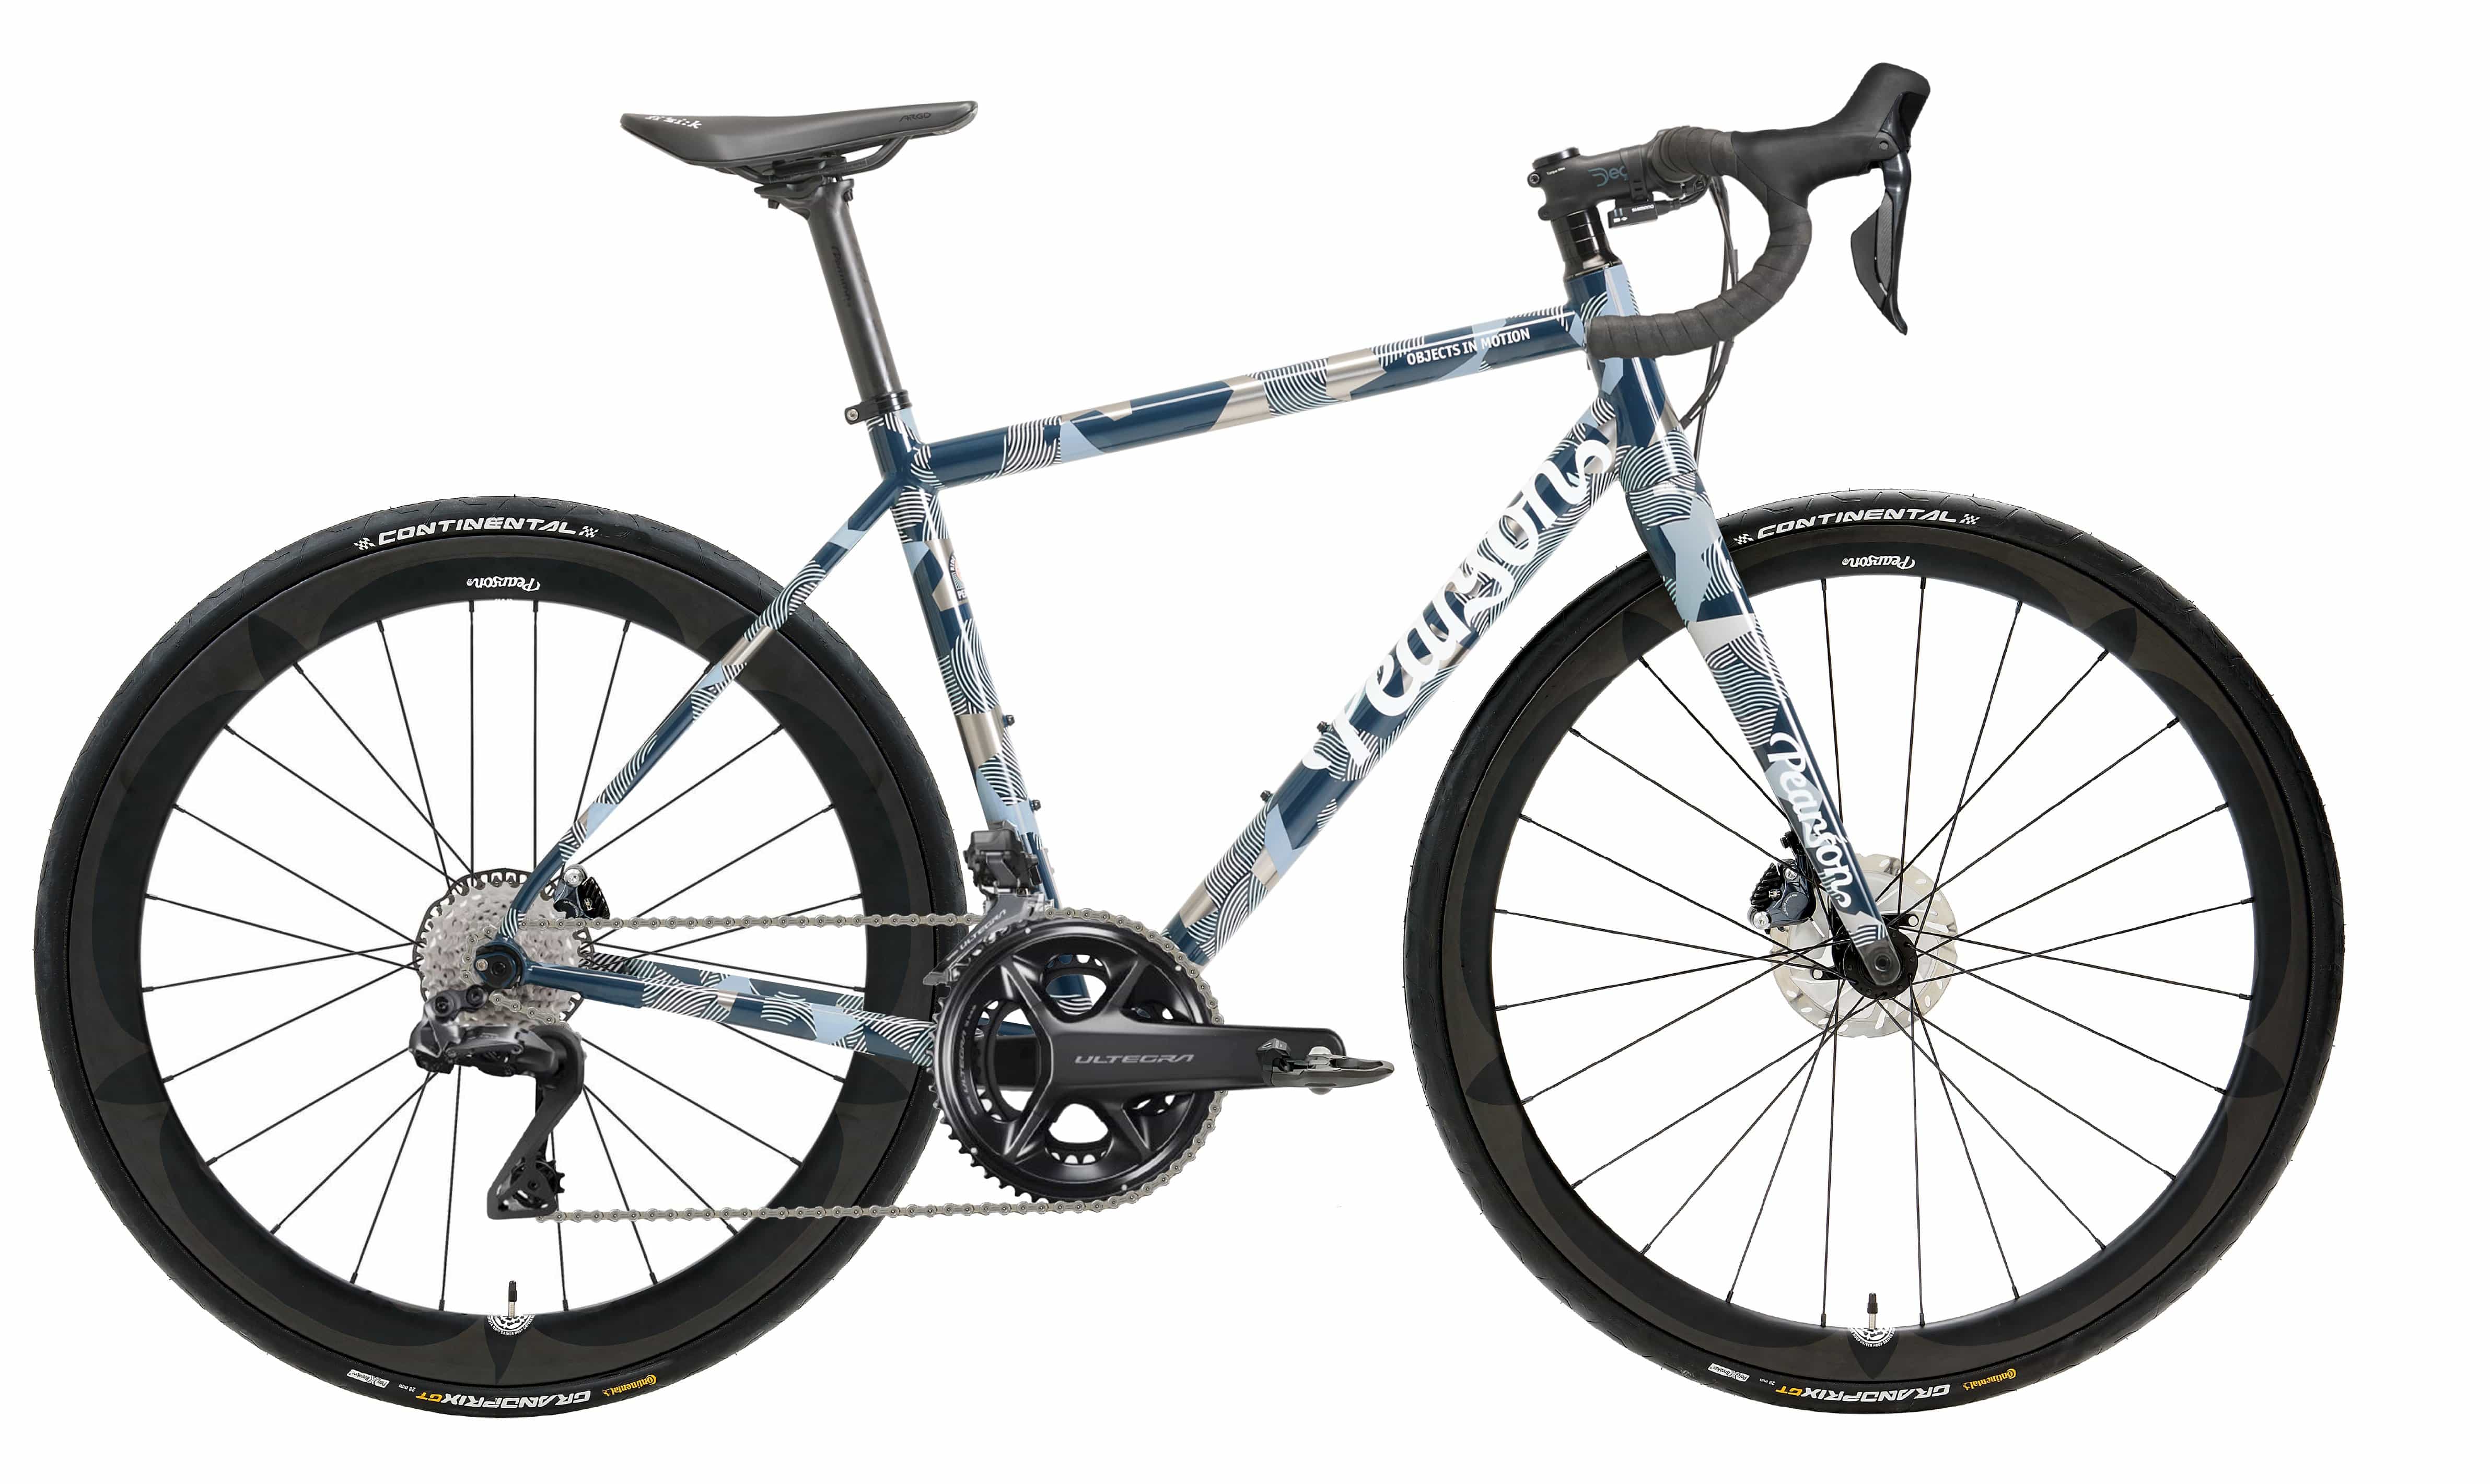 Pcs  Objects In Motion - Titanium Road Bike  Small / Blue Camo / Shimano Ultegra R8170 12 Speed Di2 - Hoopdriver Cut And Thrust Carbon Wheels